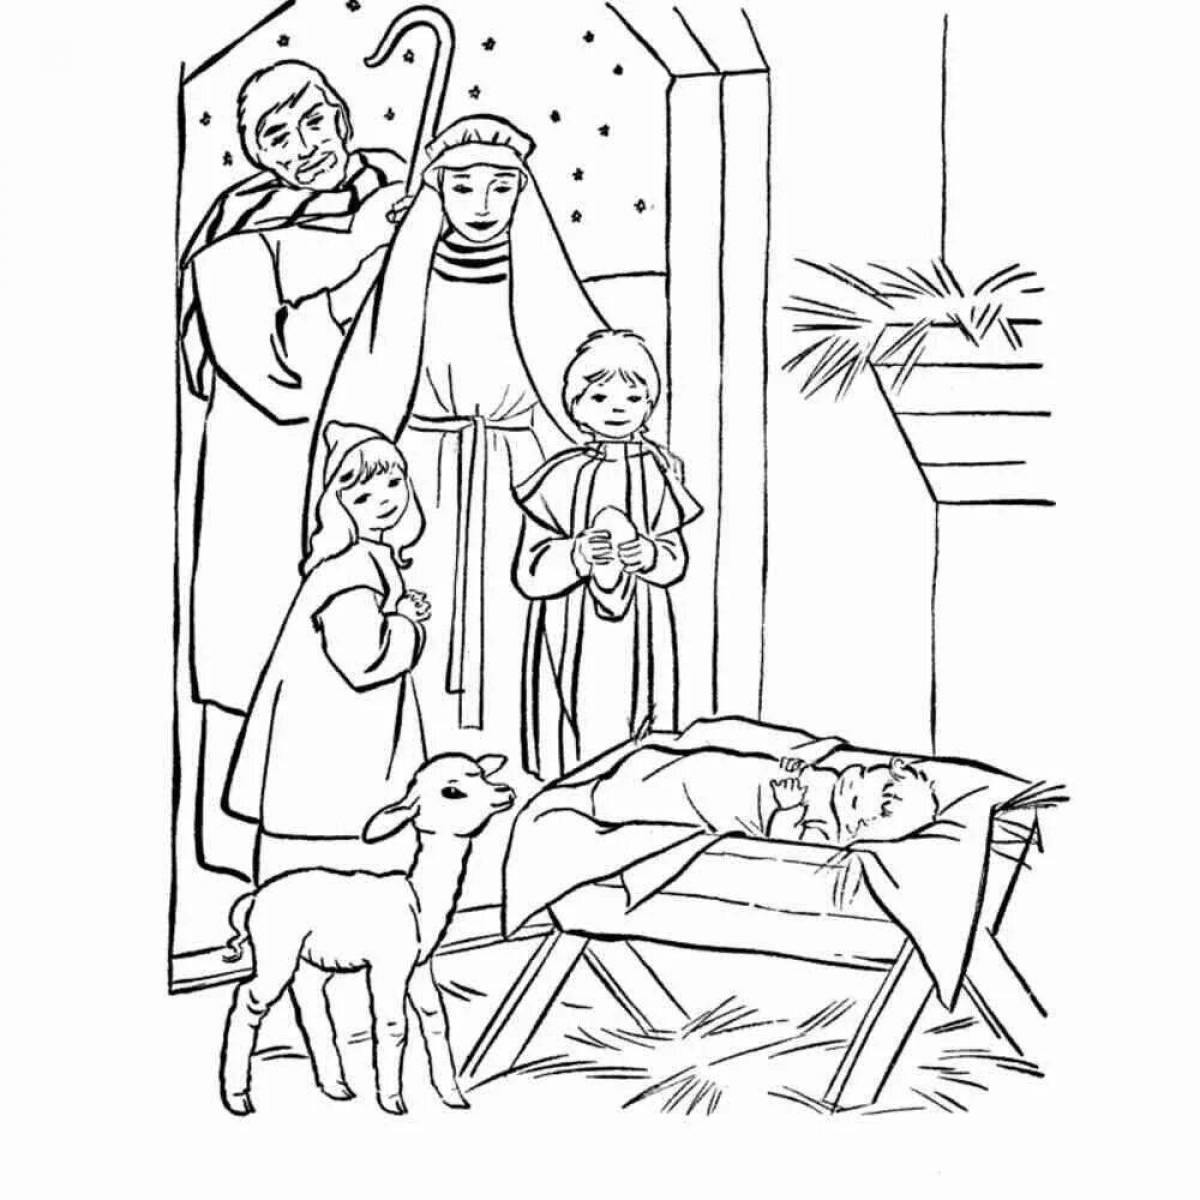 Blessed Orthodox Christmas coloring page